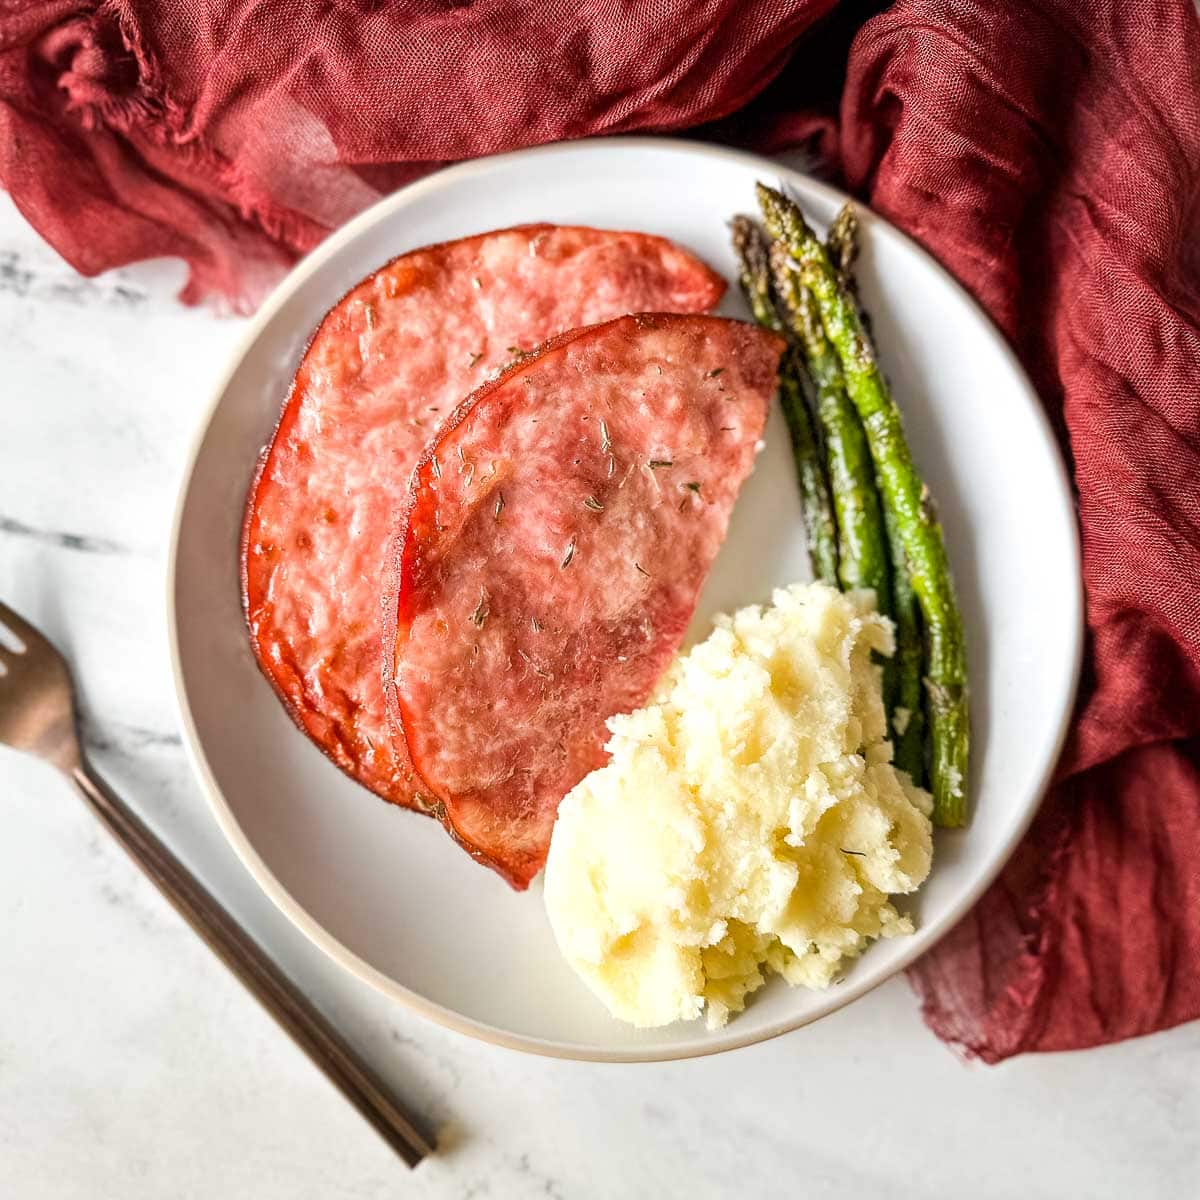 air fryer ham steak with mashed potatoes and asparagus on a white plate.